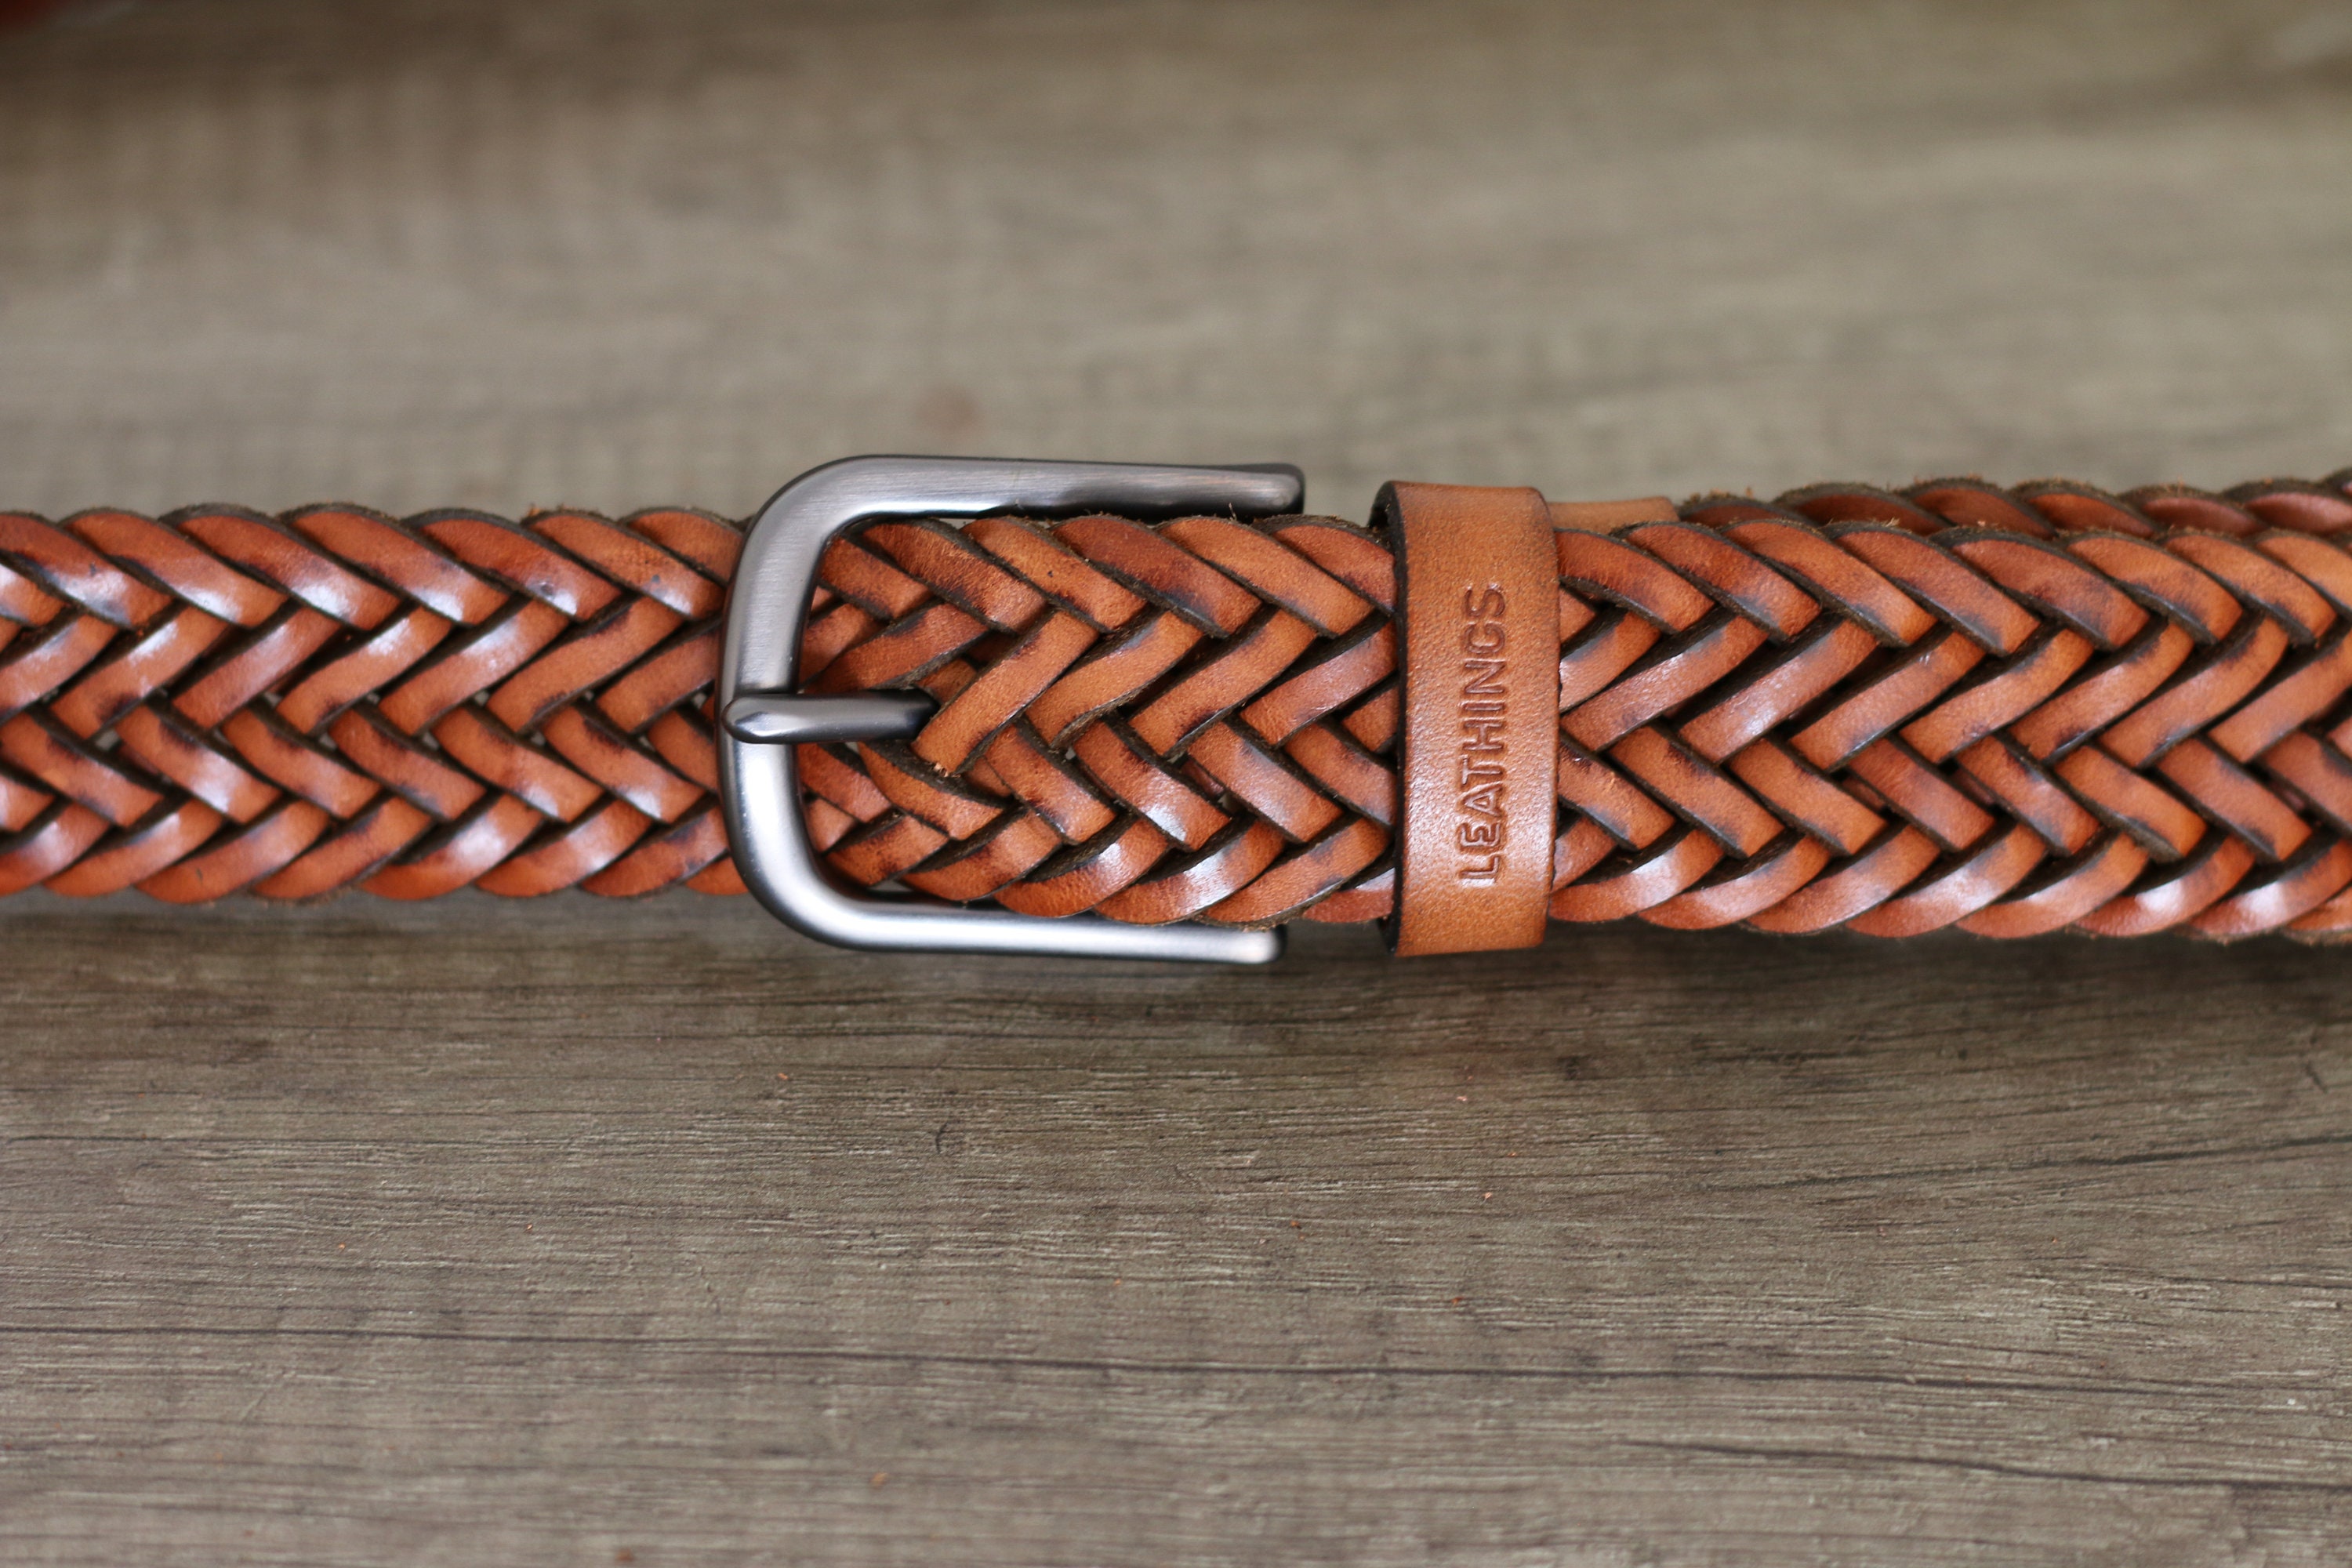 Braided Tan Leather Belt Handcrafted Vegetabled Leather Belts for Men and  Women Gift Ideas Elegant Belts Hand Weaving Leather Accessories -   Norway